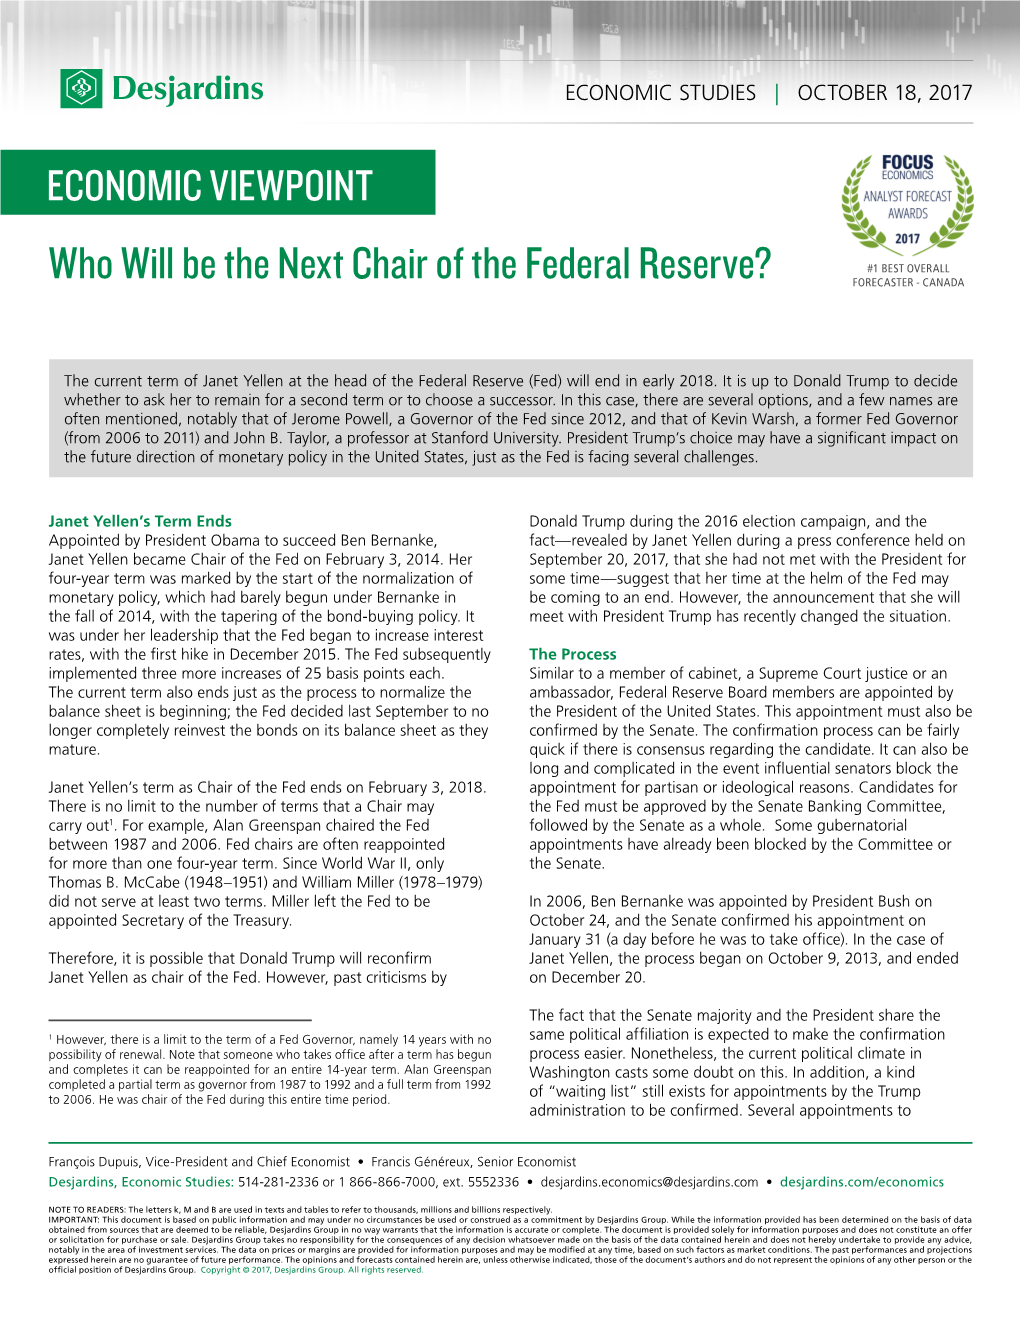 Who Will Be the Next Chair of the Federal Reserve? #1 BEST OVERALL FORECASTER - CANADA